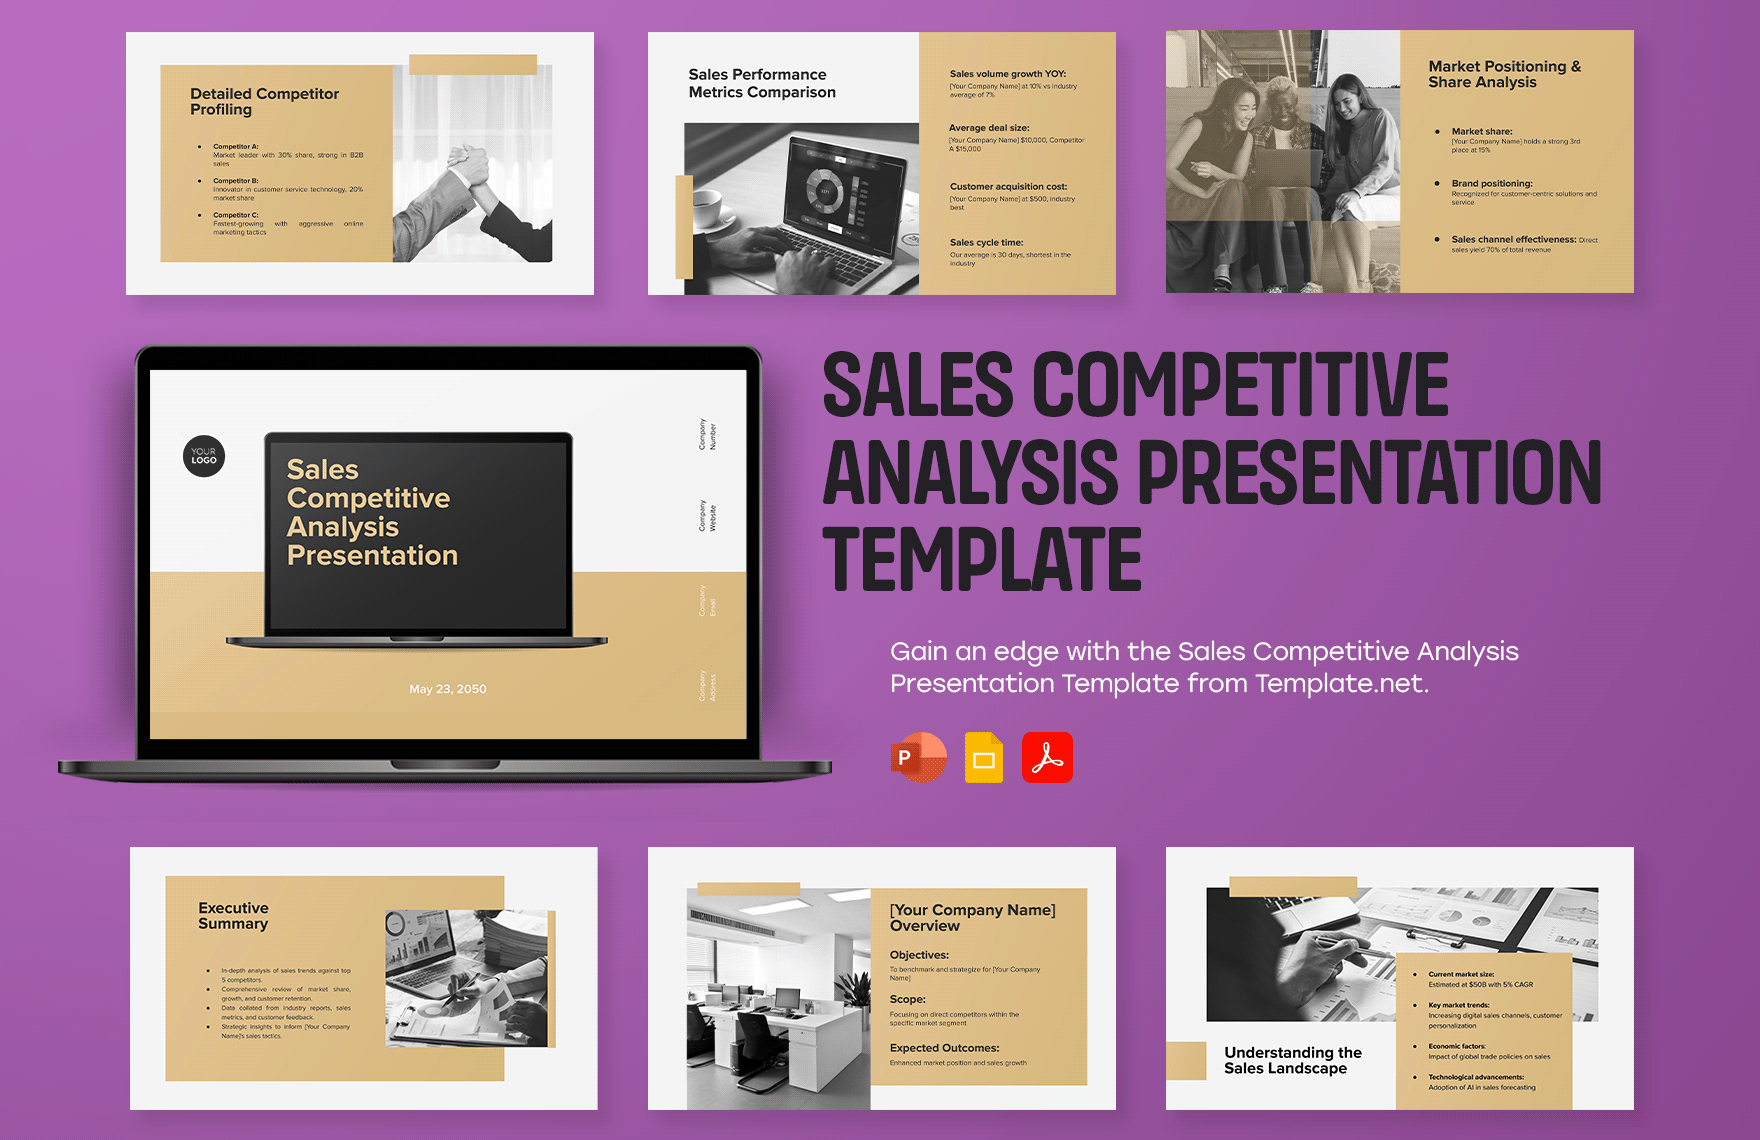 Sales Competitive Analysis Presentation Template